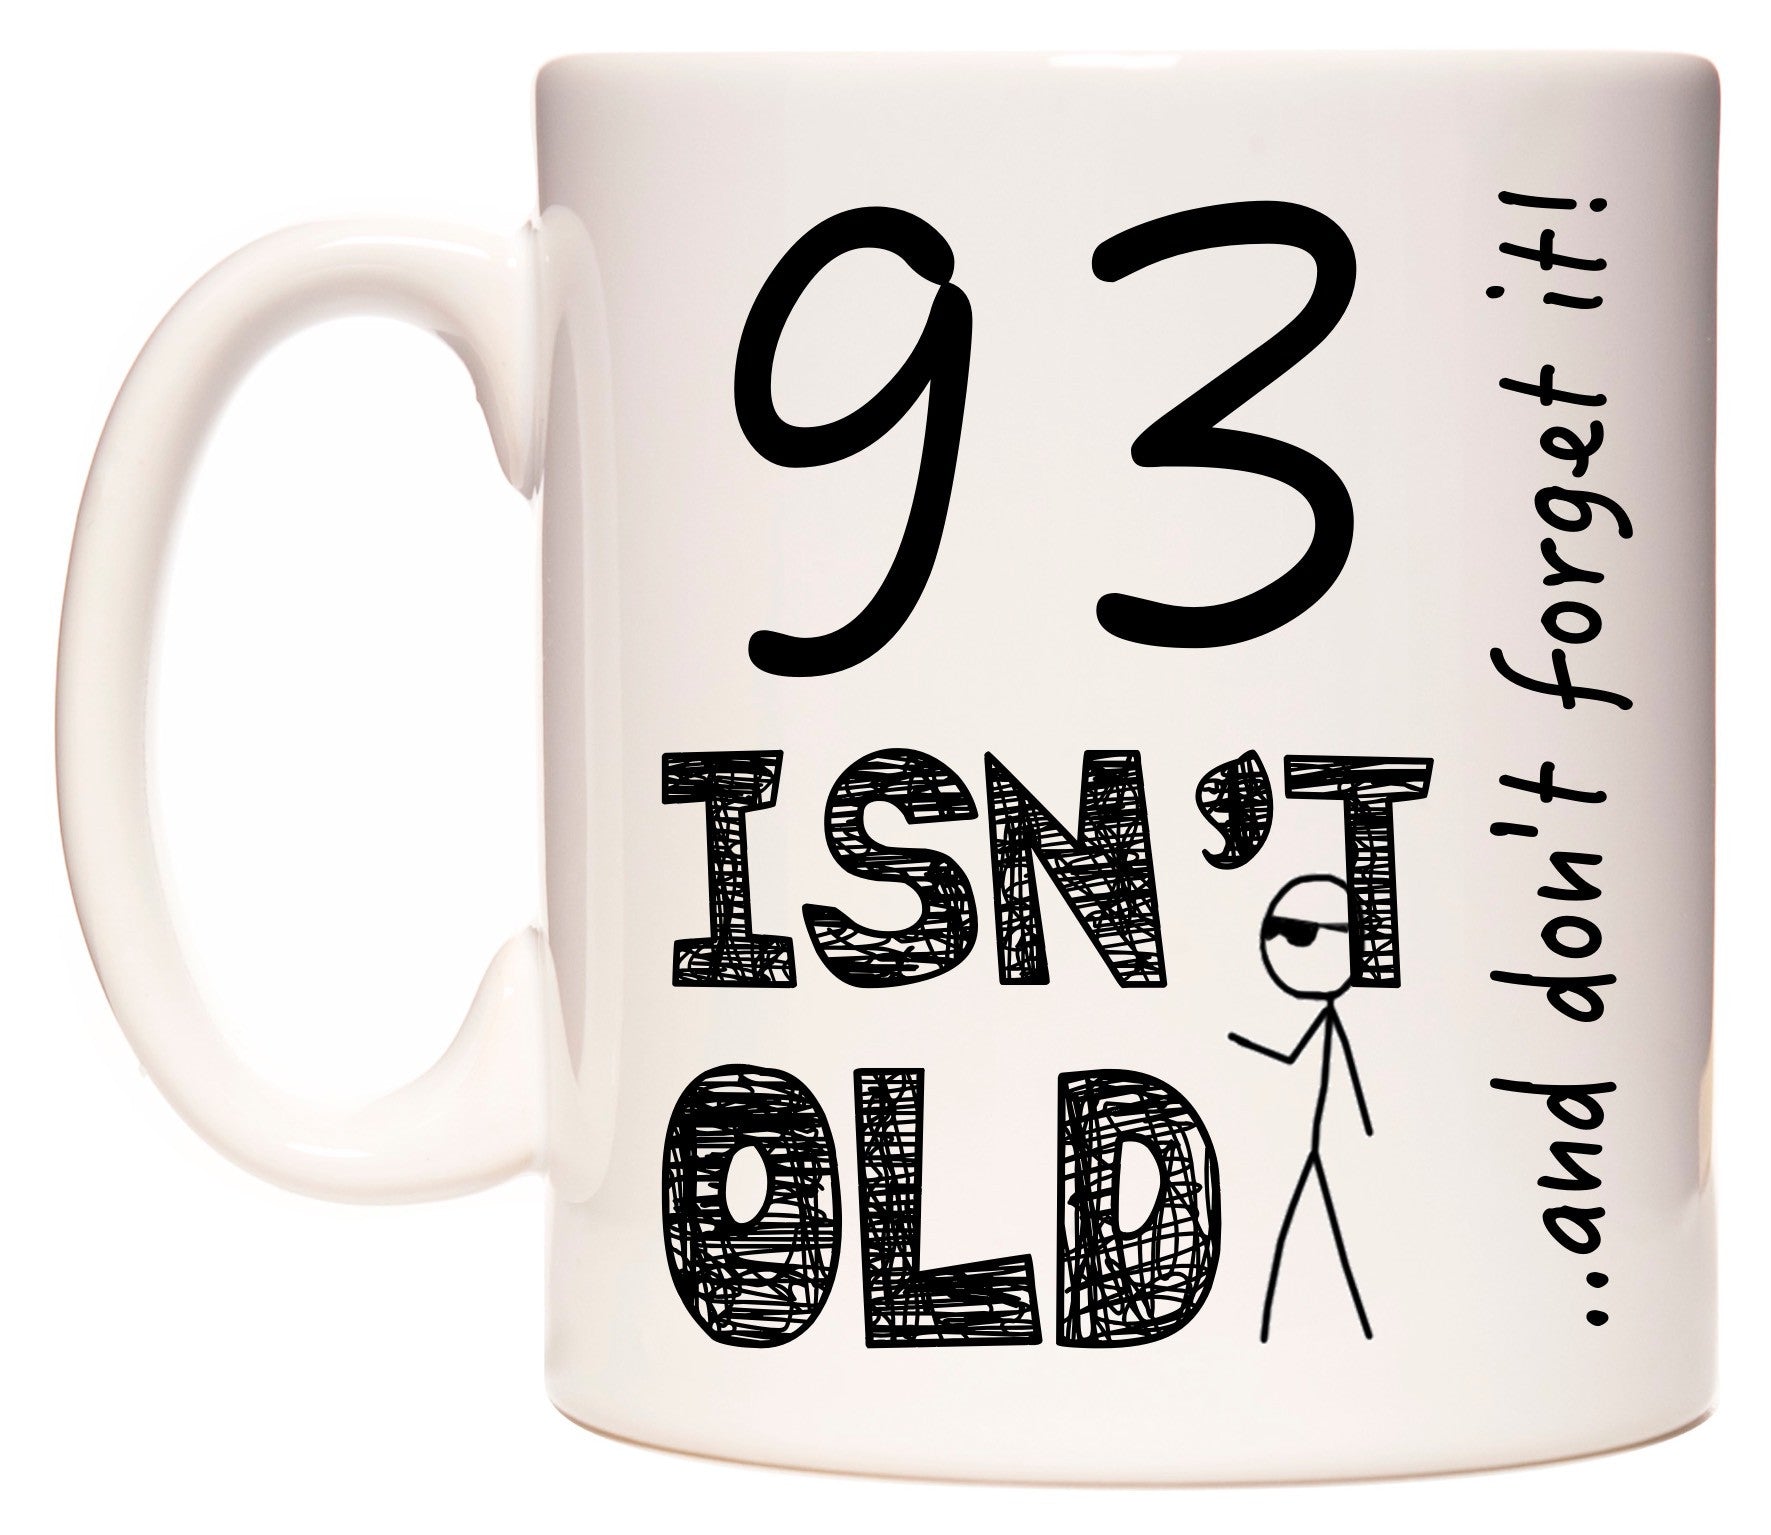 This mug features 93 Isn't Old